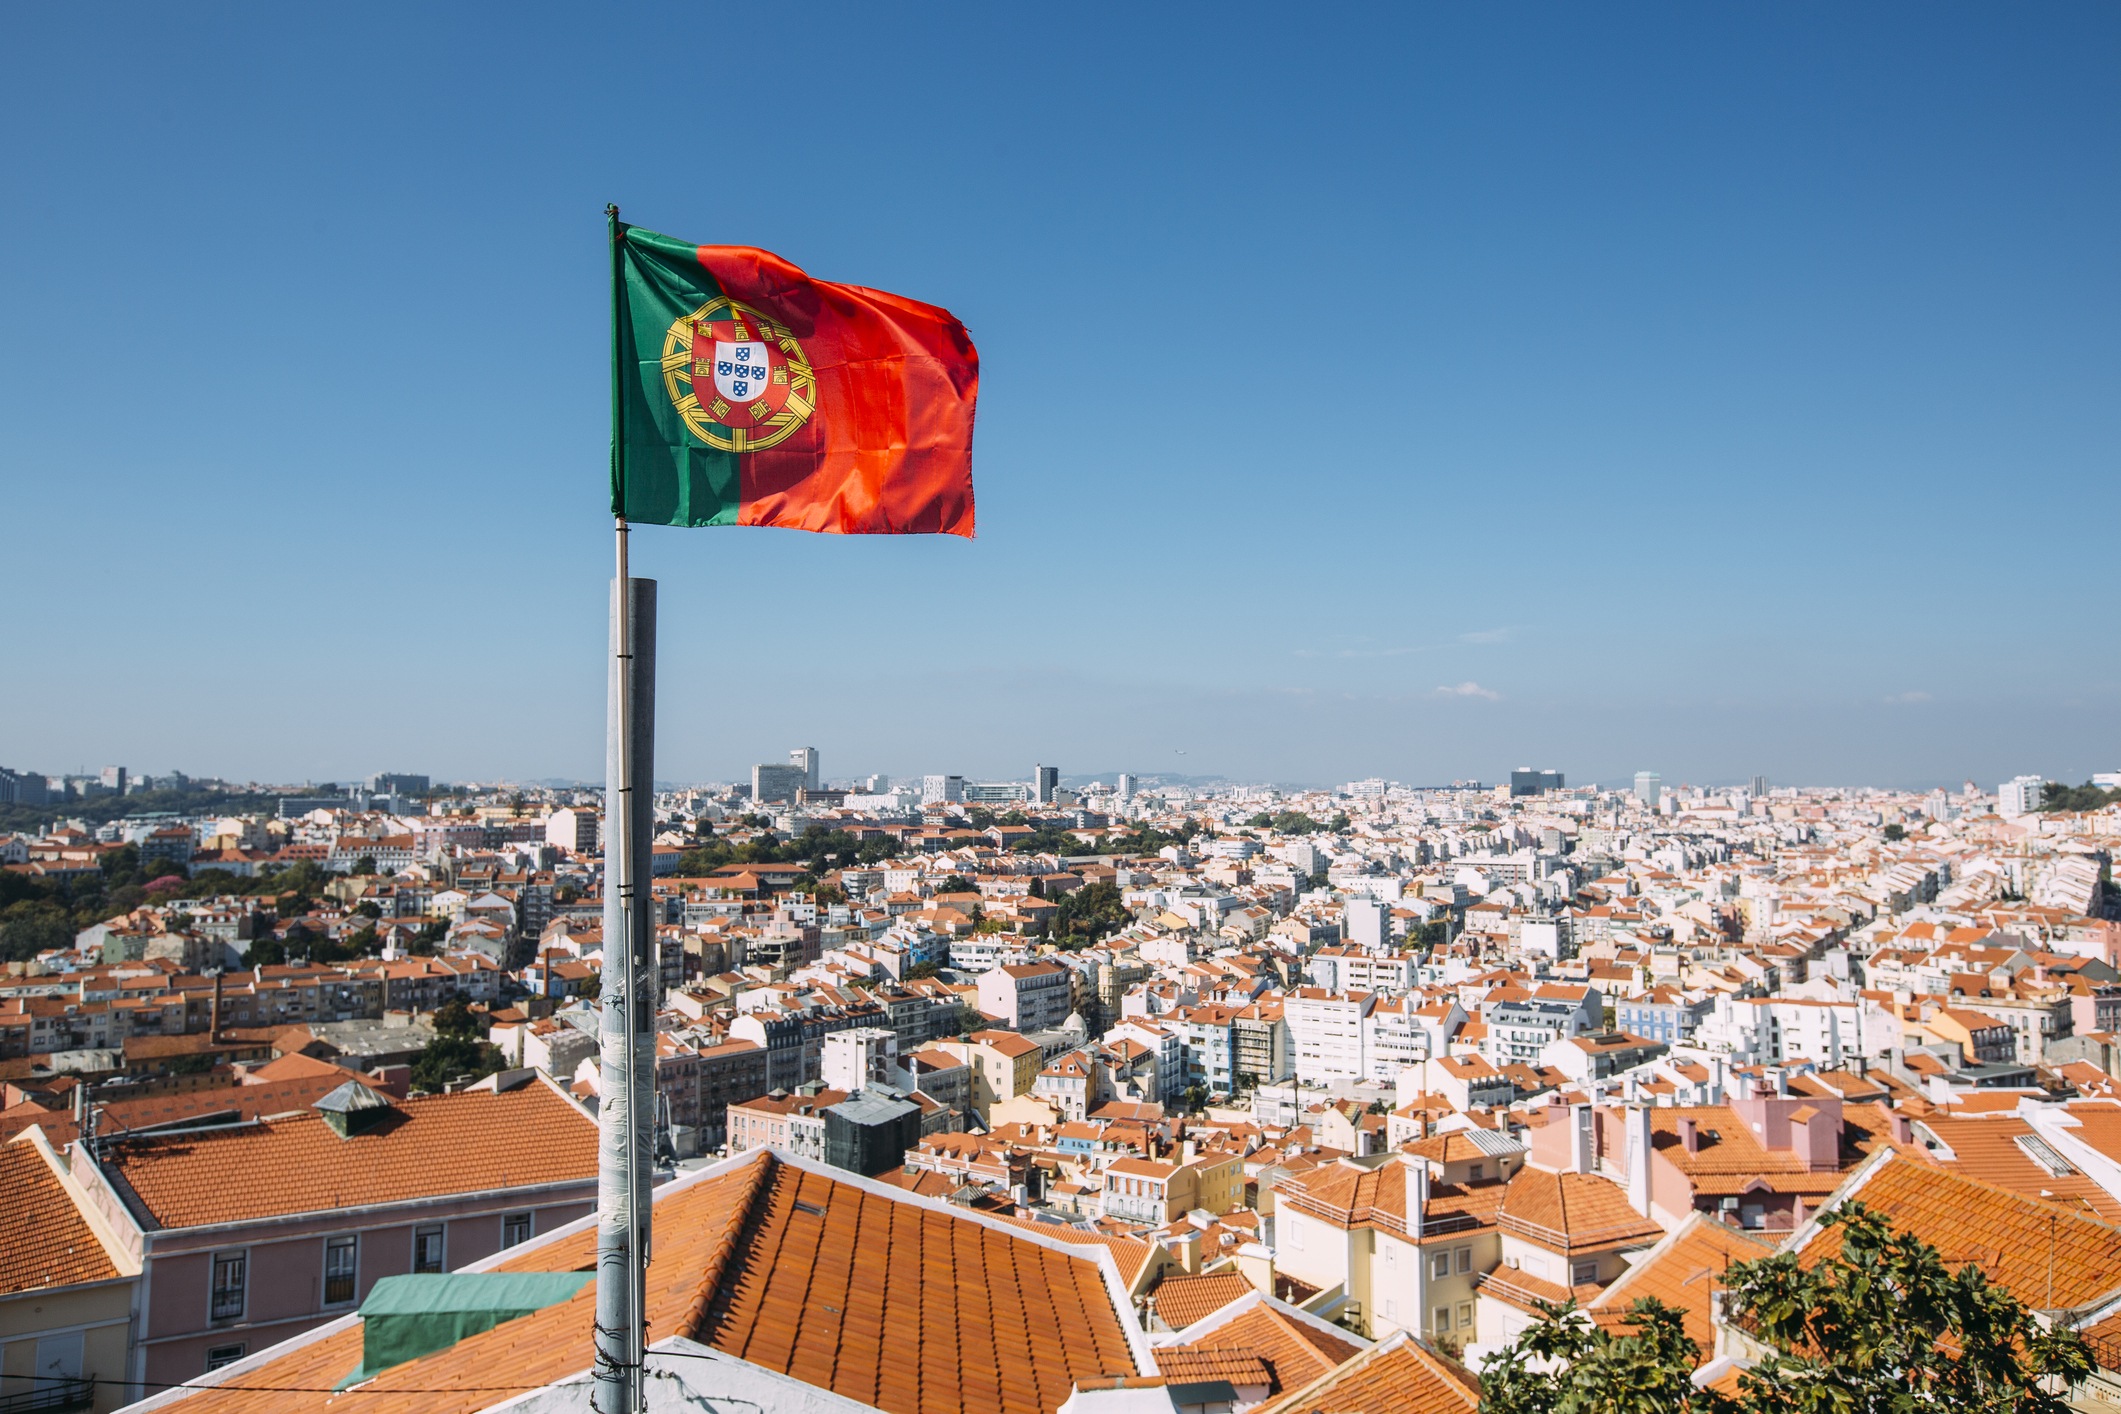 Portugal requires now negative Covid test or vaccination in restaurants and hotels